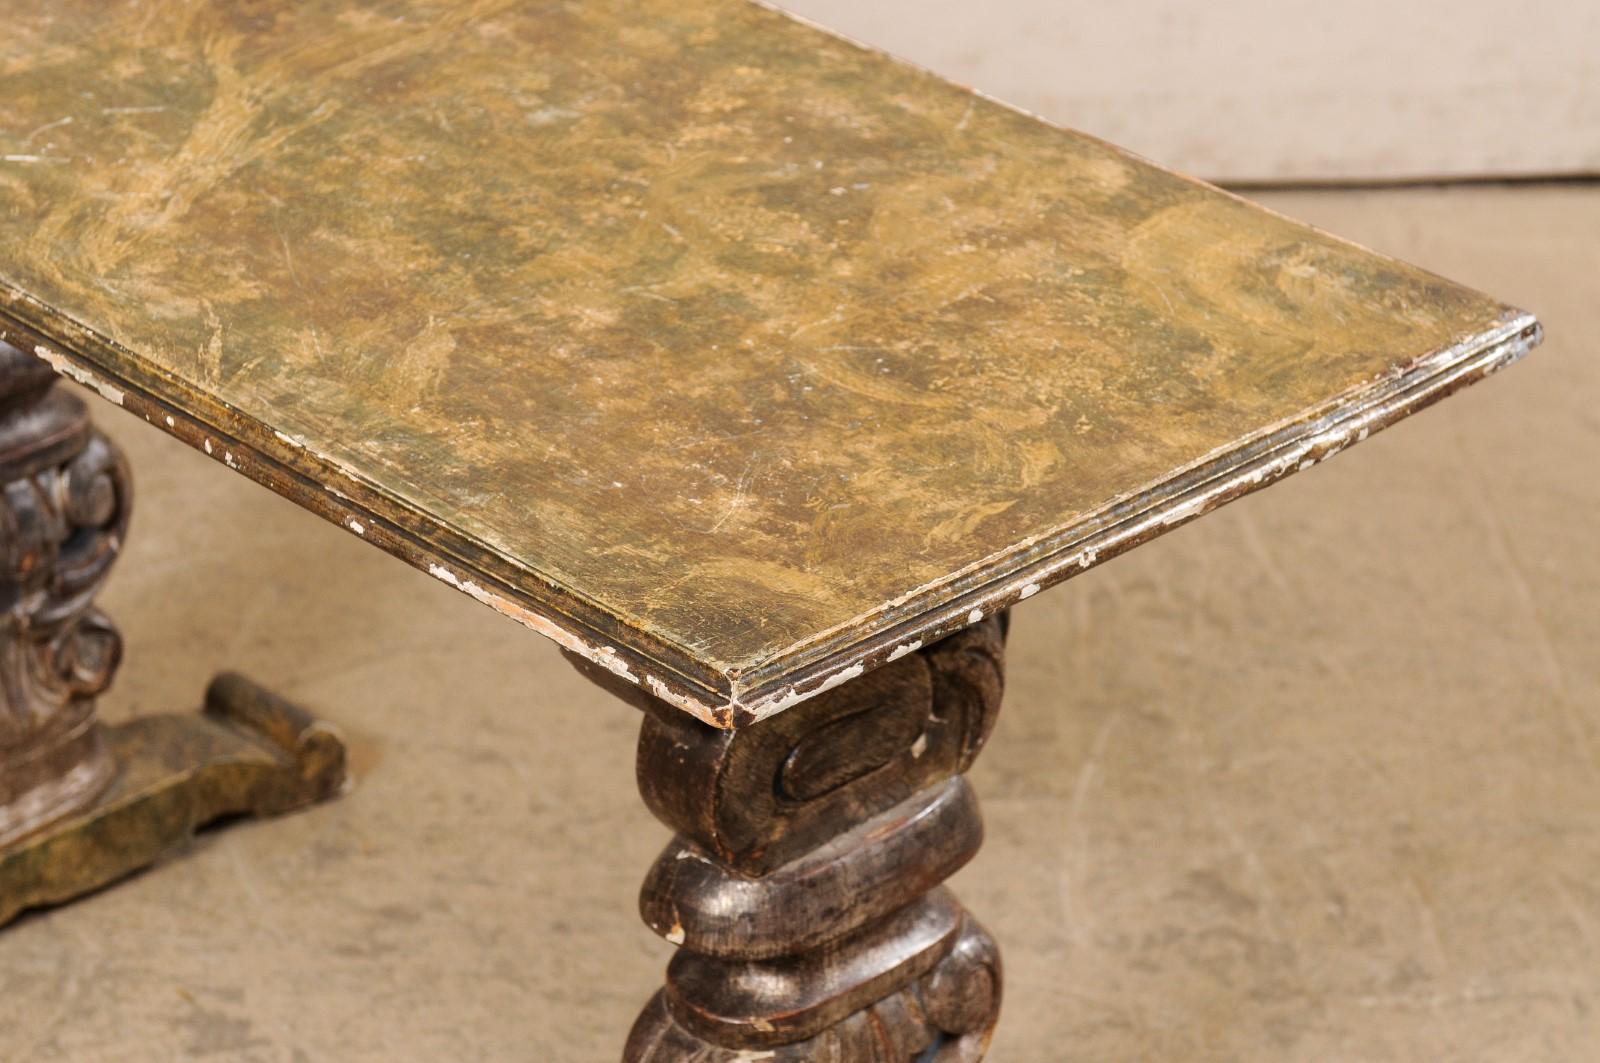 Italian Antique Coffee Table W/Carved Trestle Legs & Faux Marble Top For Sale 2